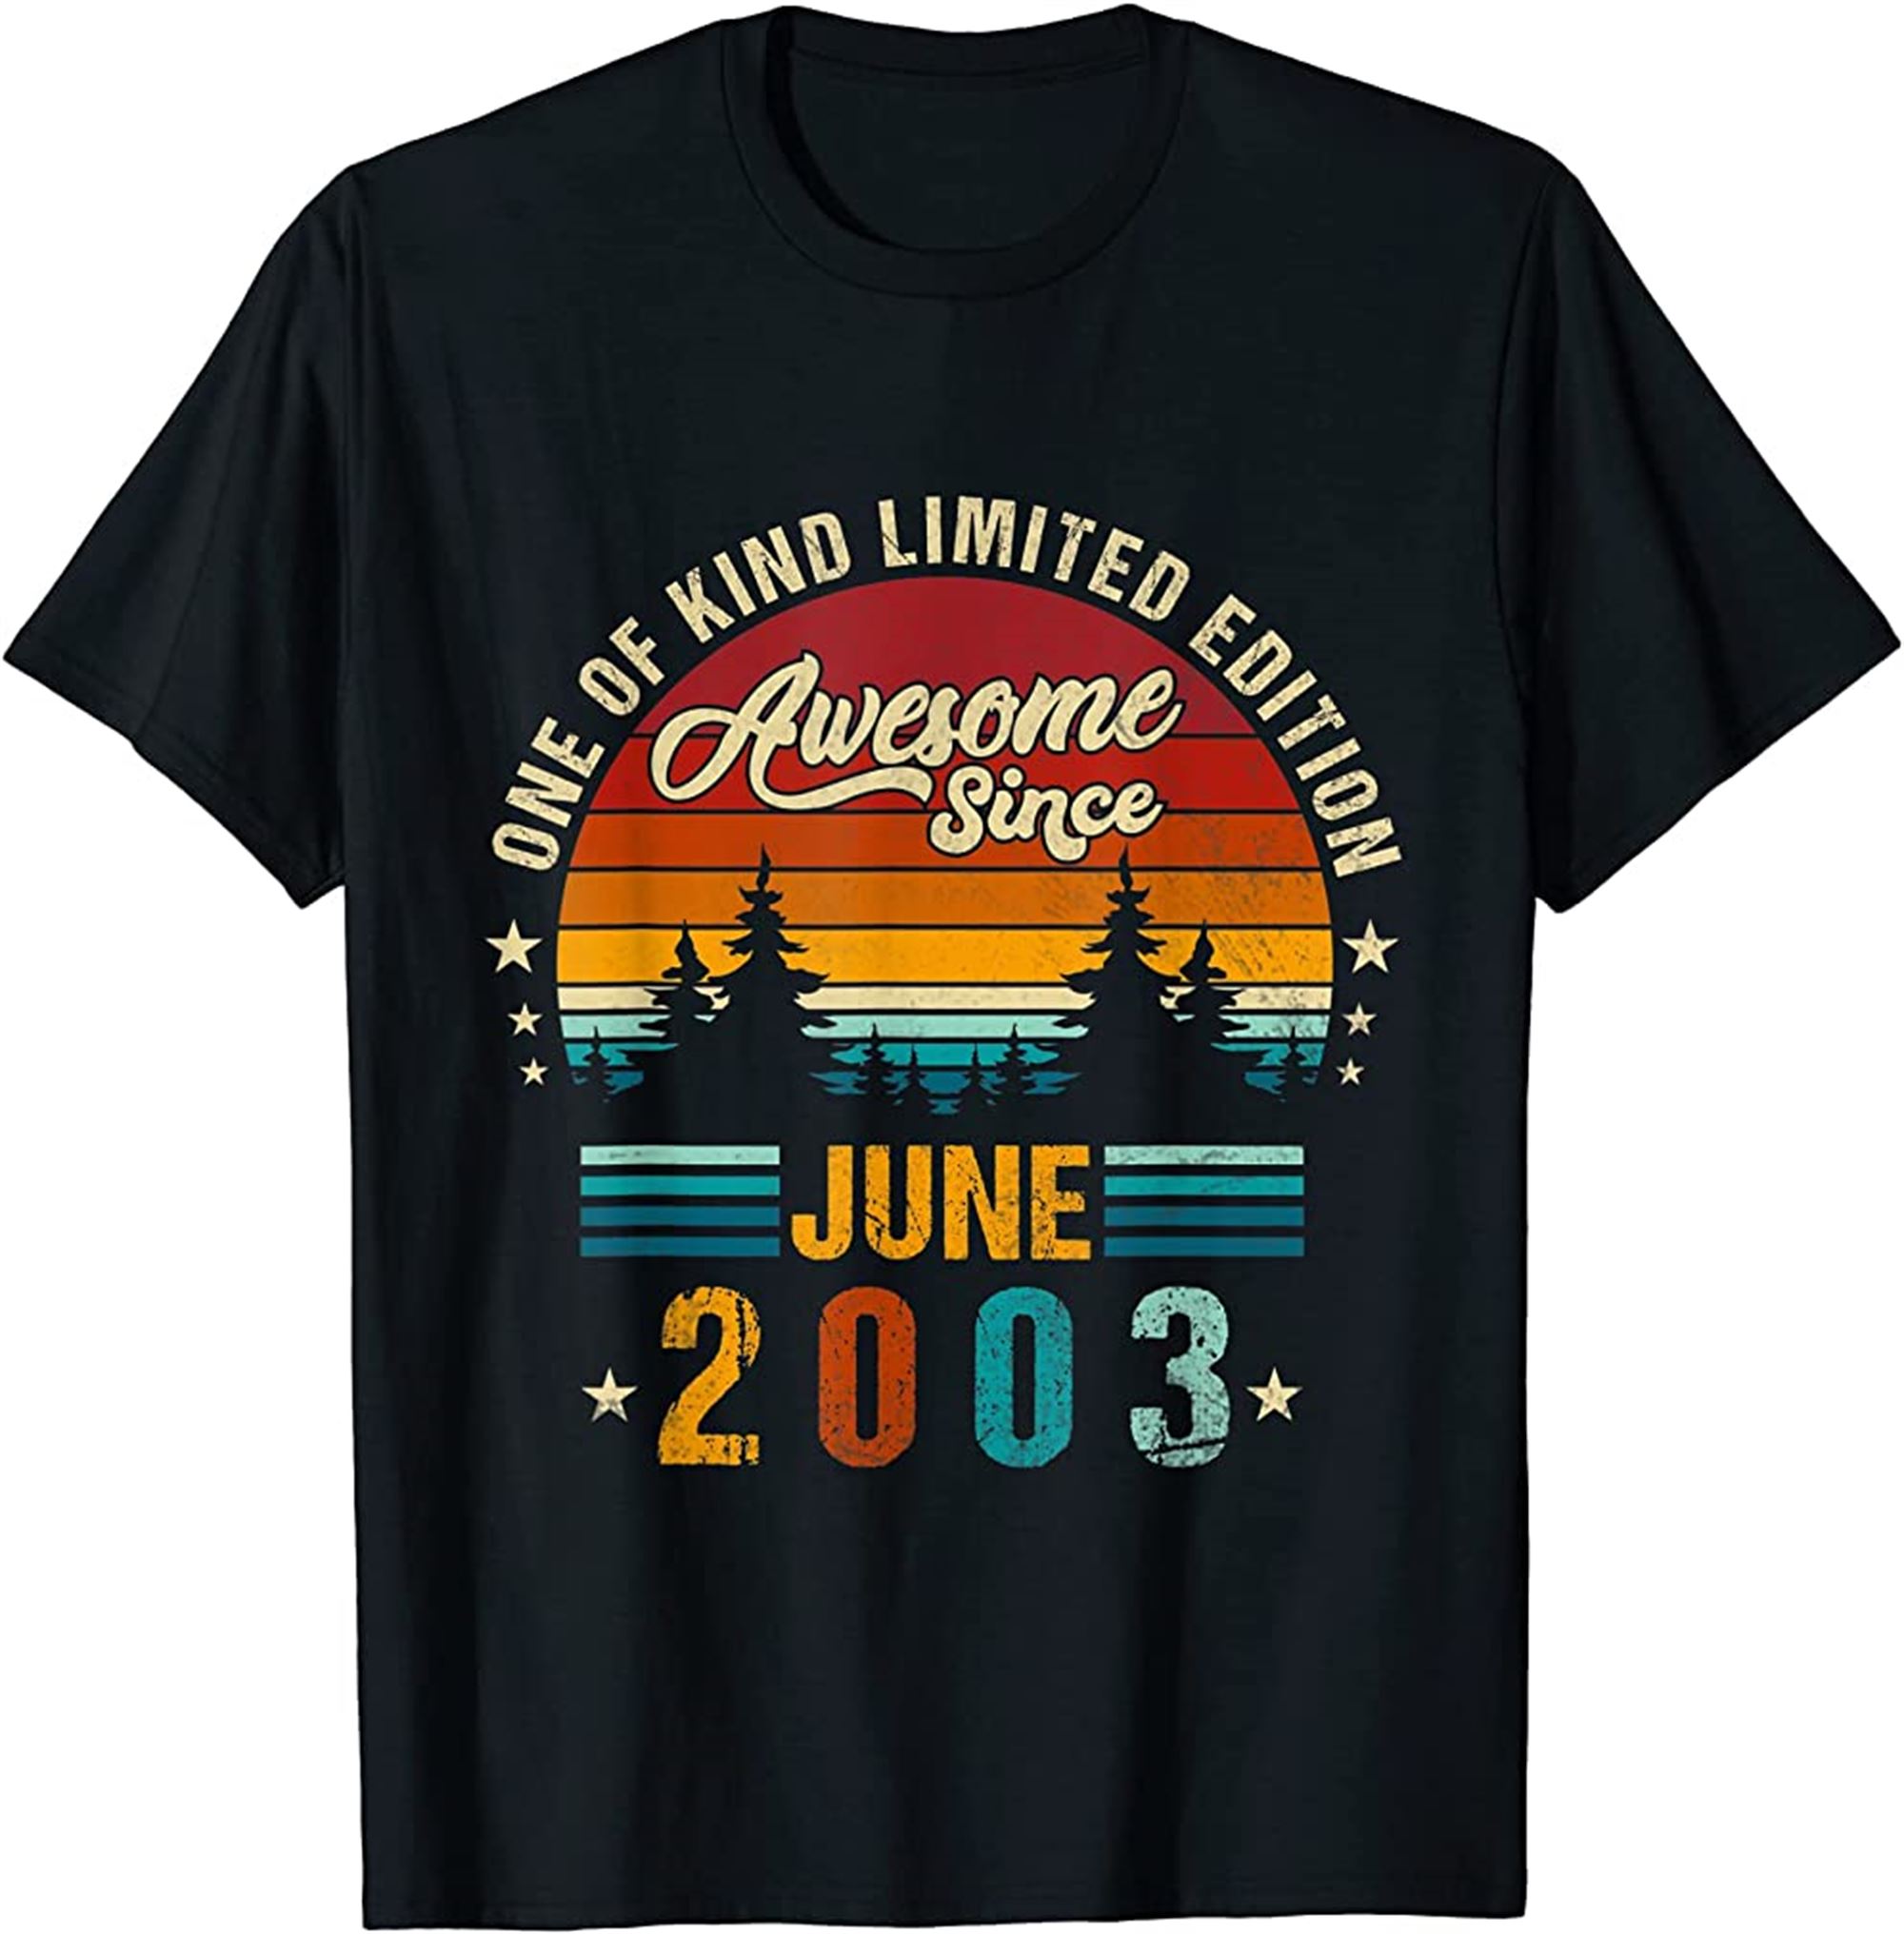 Vintage 19th Birthday Awesome Since June 2003 Epic Legend T-shirt Plus Size Up To 5xl